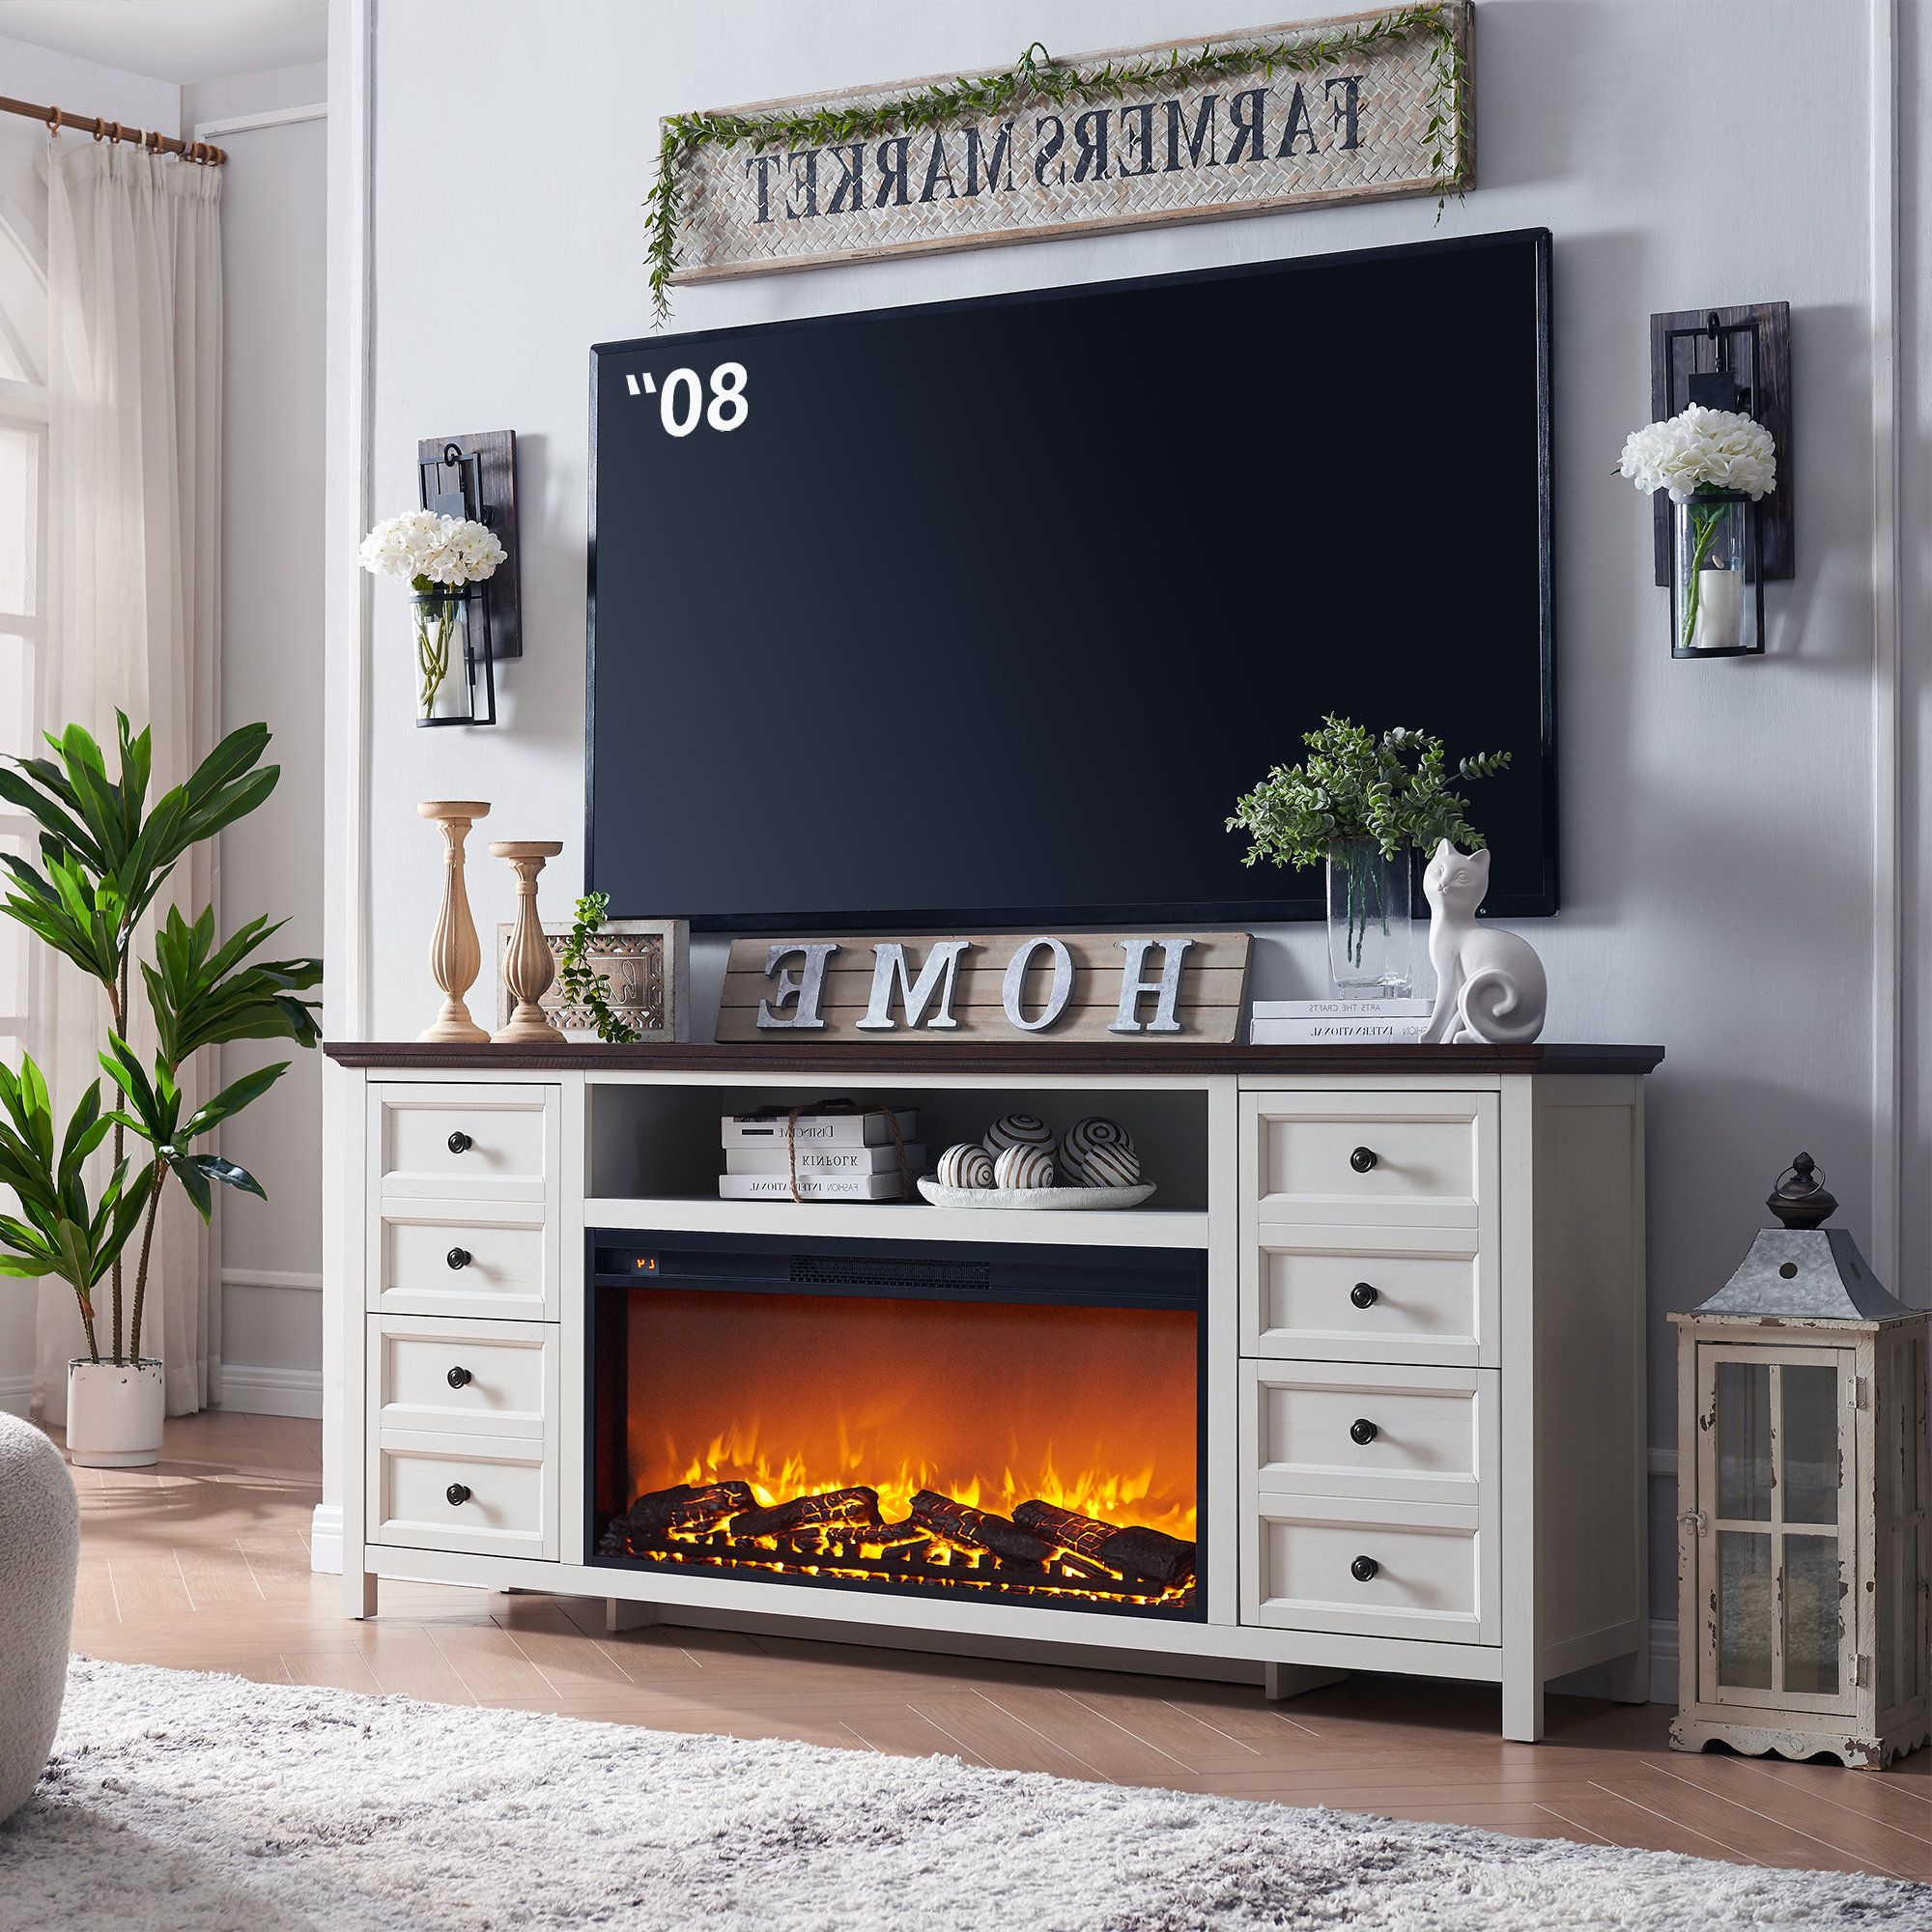 Red Barrel Studio® Conogher Tv Stand For Tvs Up To 80" With Electric  Fireplace Included & Reviews | Wayfair With Regard To Tv Stands With Electric Fireplace (View 16 of 20)